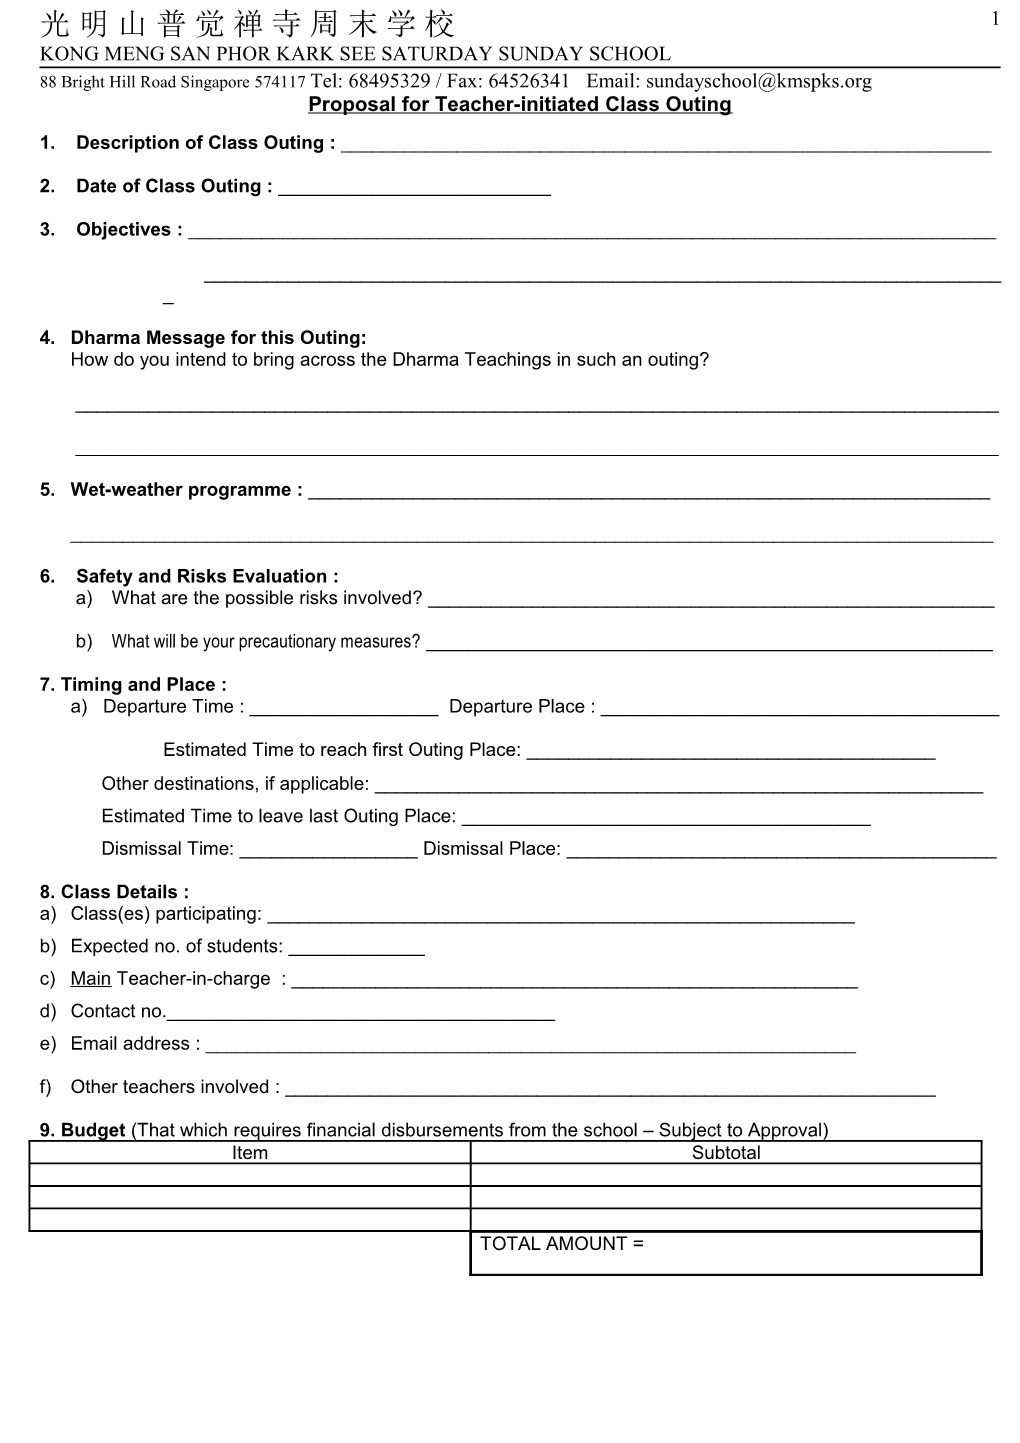 Class Outing Application Form